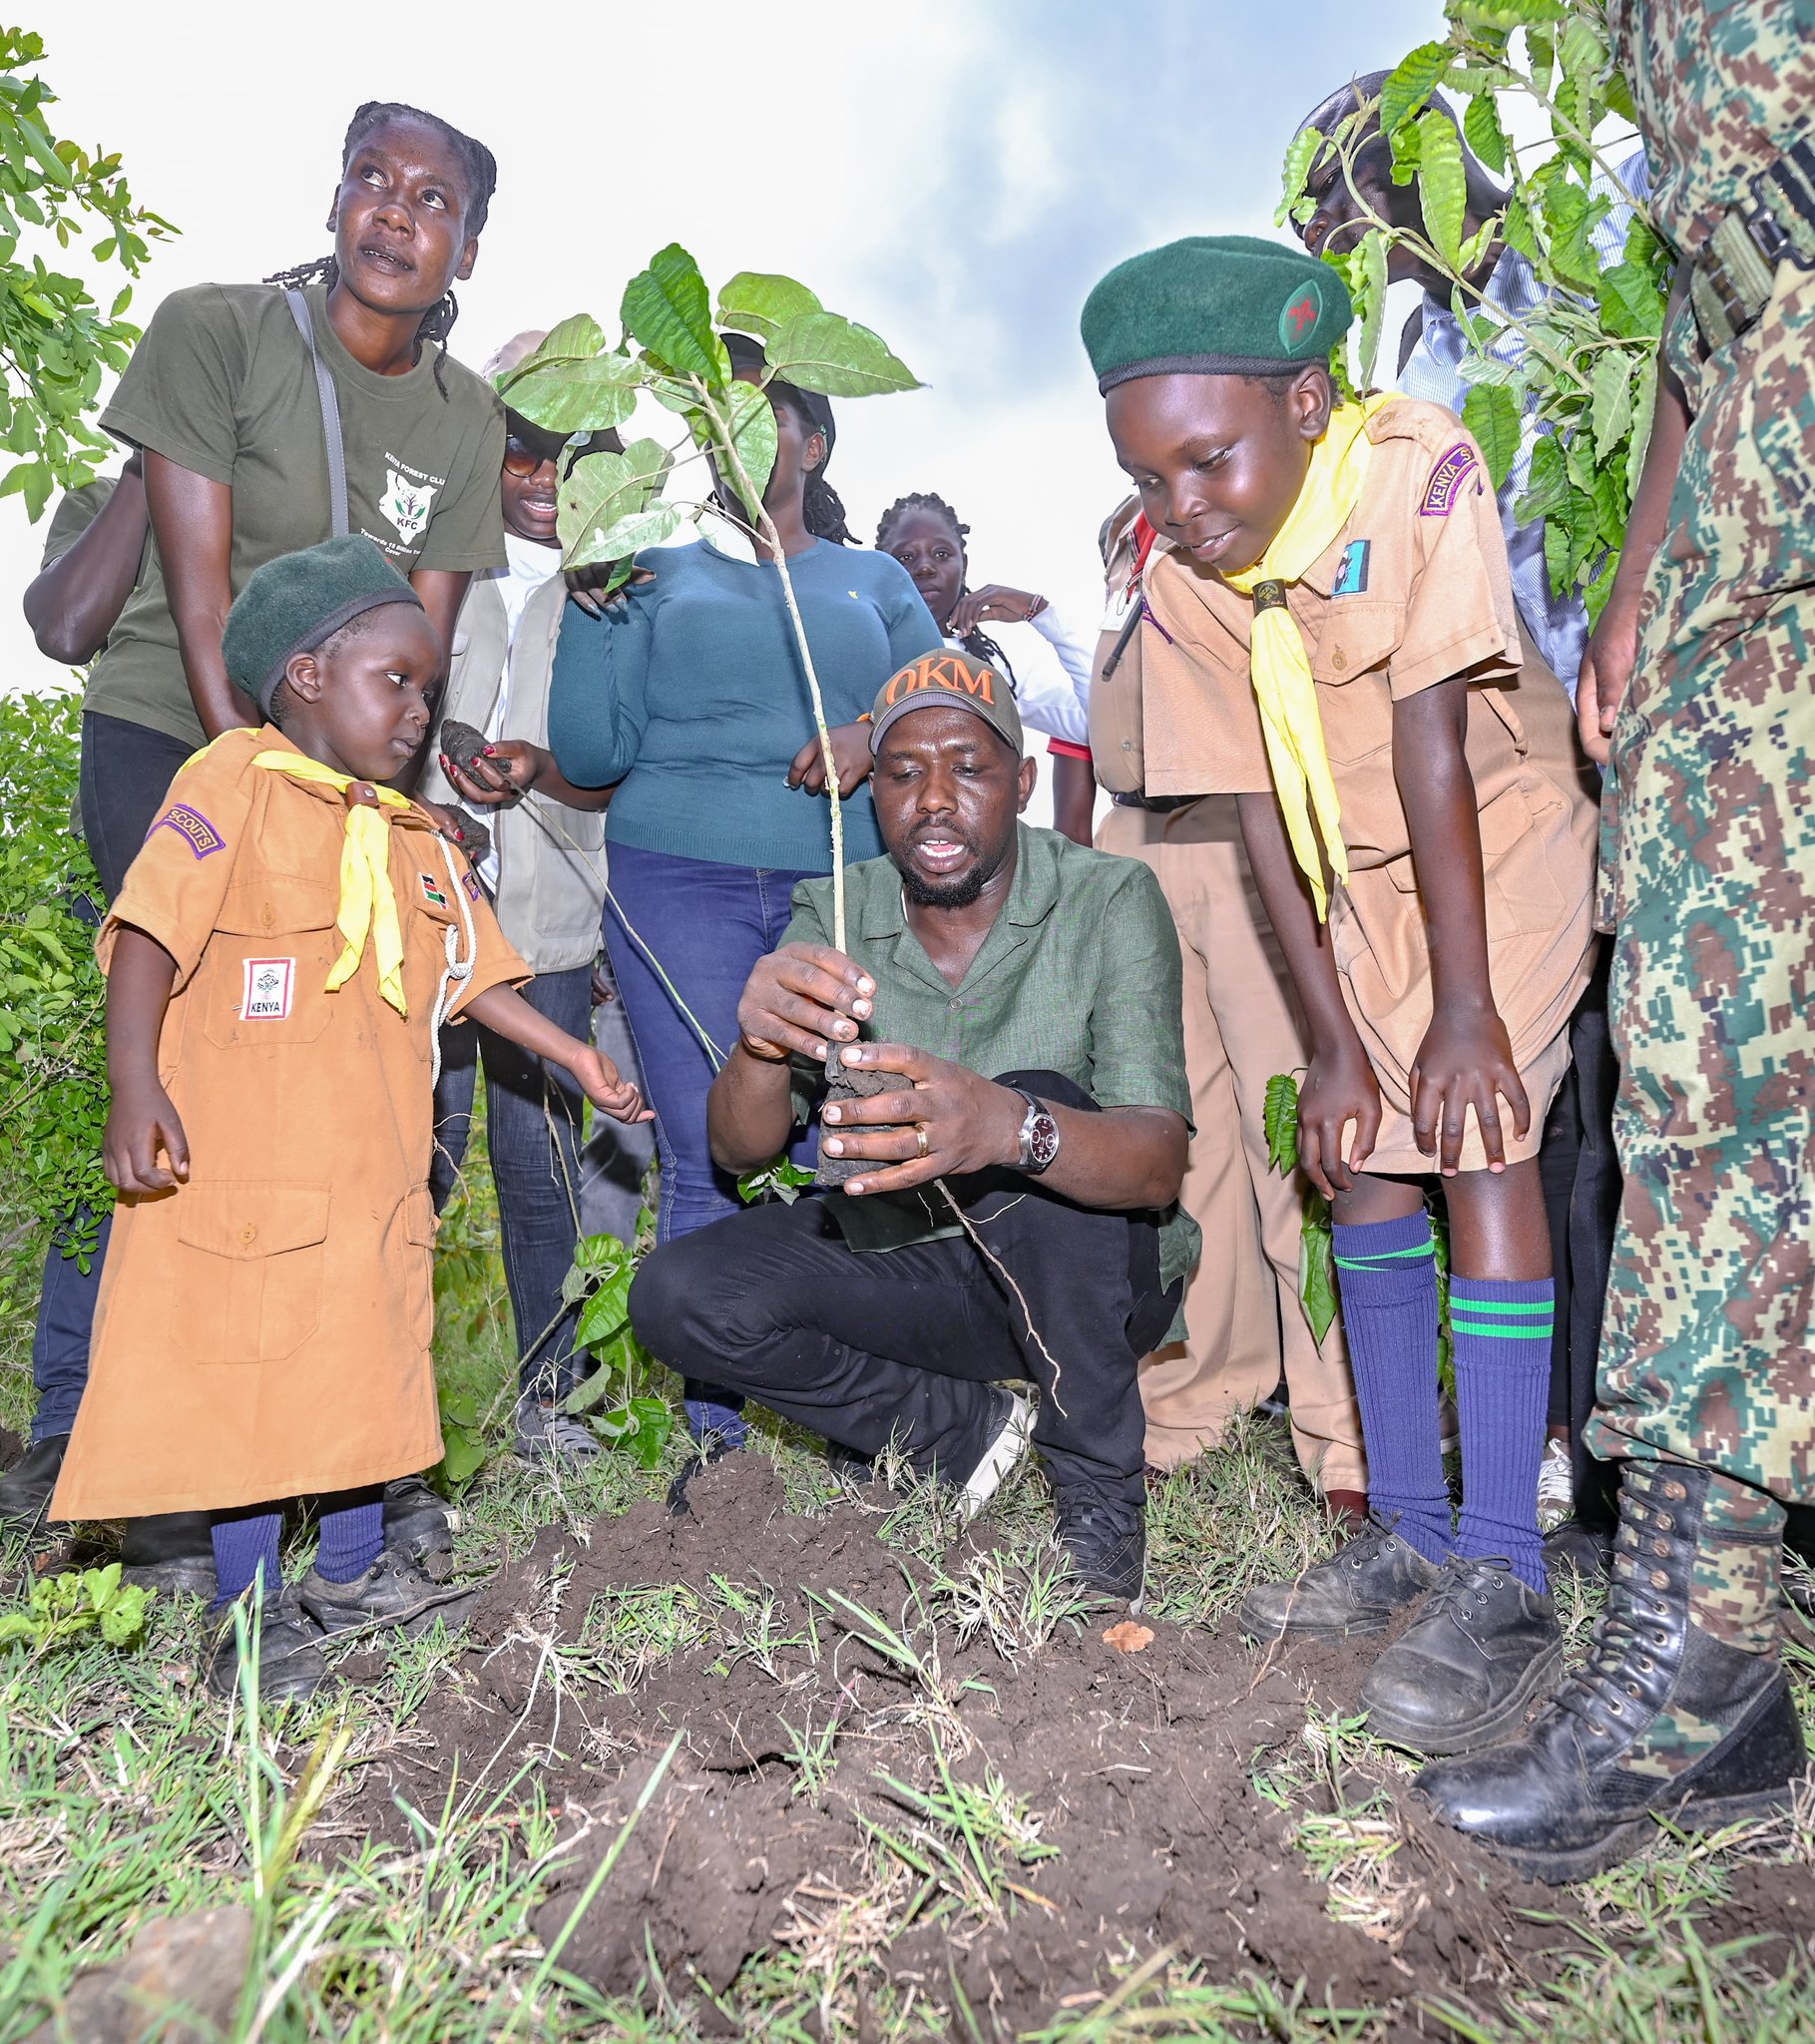 Cabinet Secretary for Roads and Transport takes part in Tree Planting at Gembe Hills, Homa Bay County on National Tree Growing Day